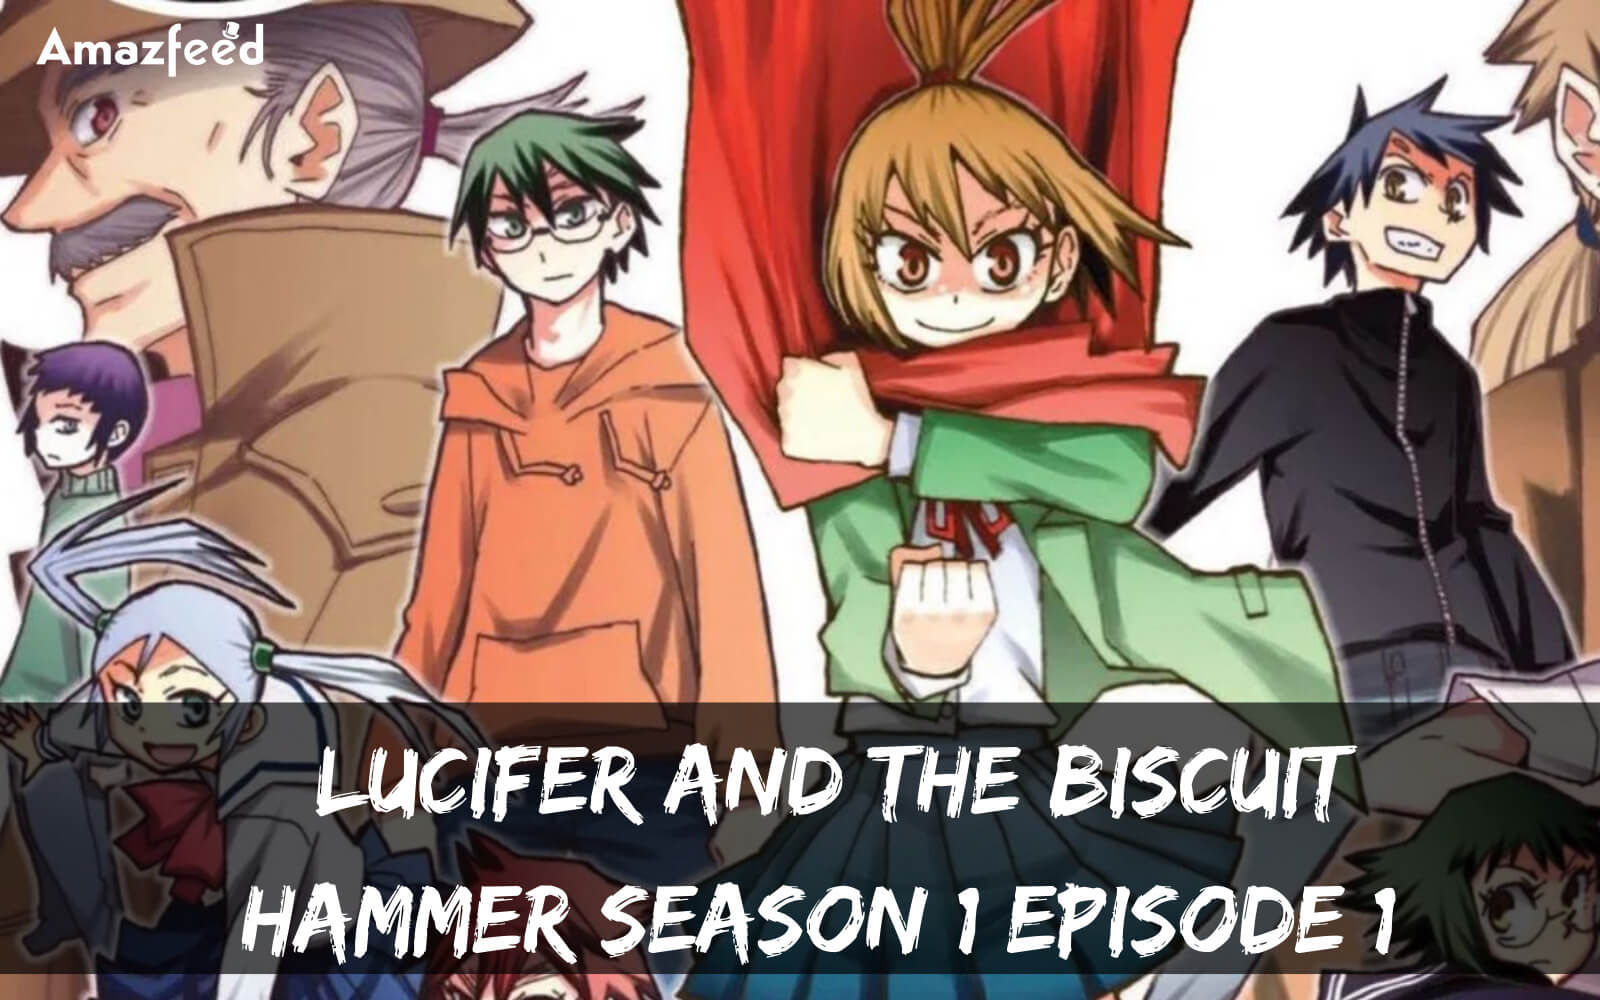 Lucifer and the Biscuit Hammer Season 1 Episode 1 release date